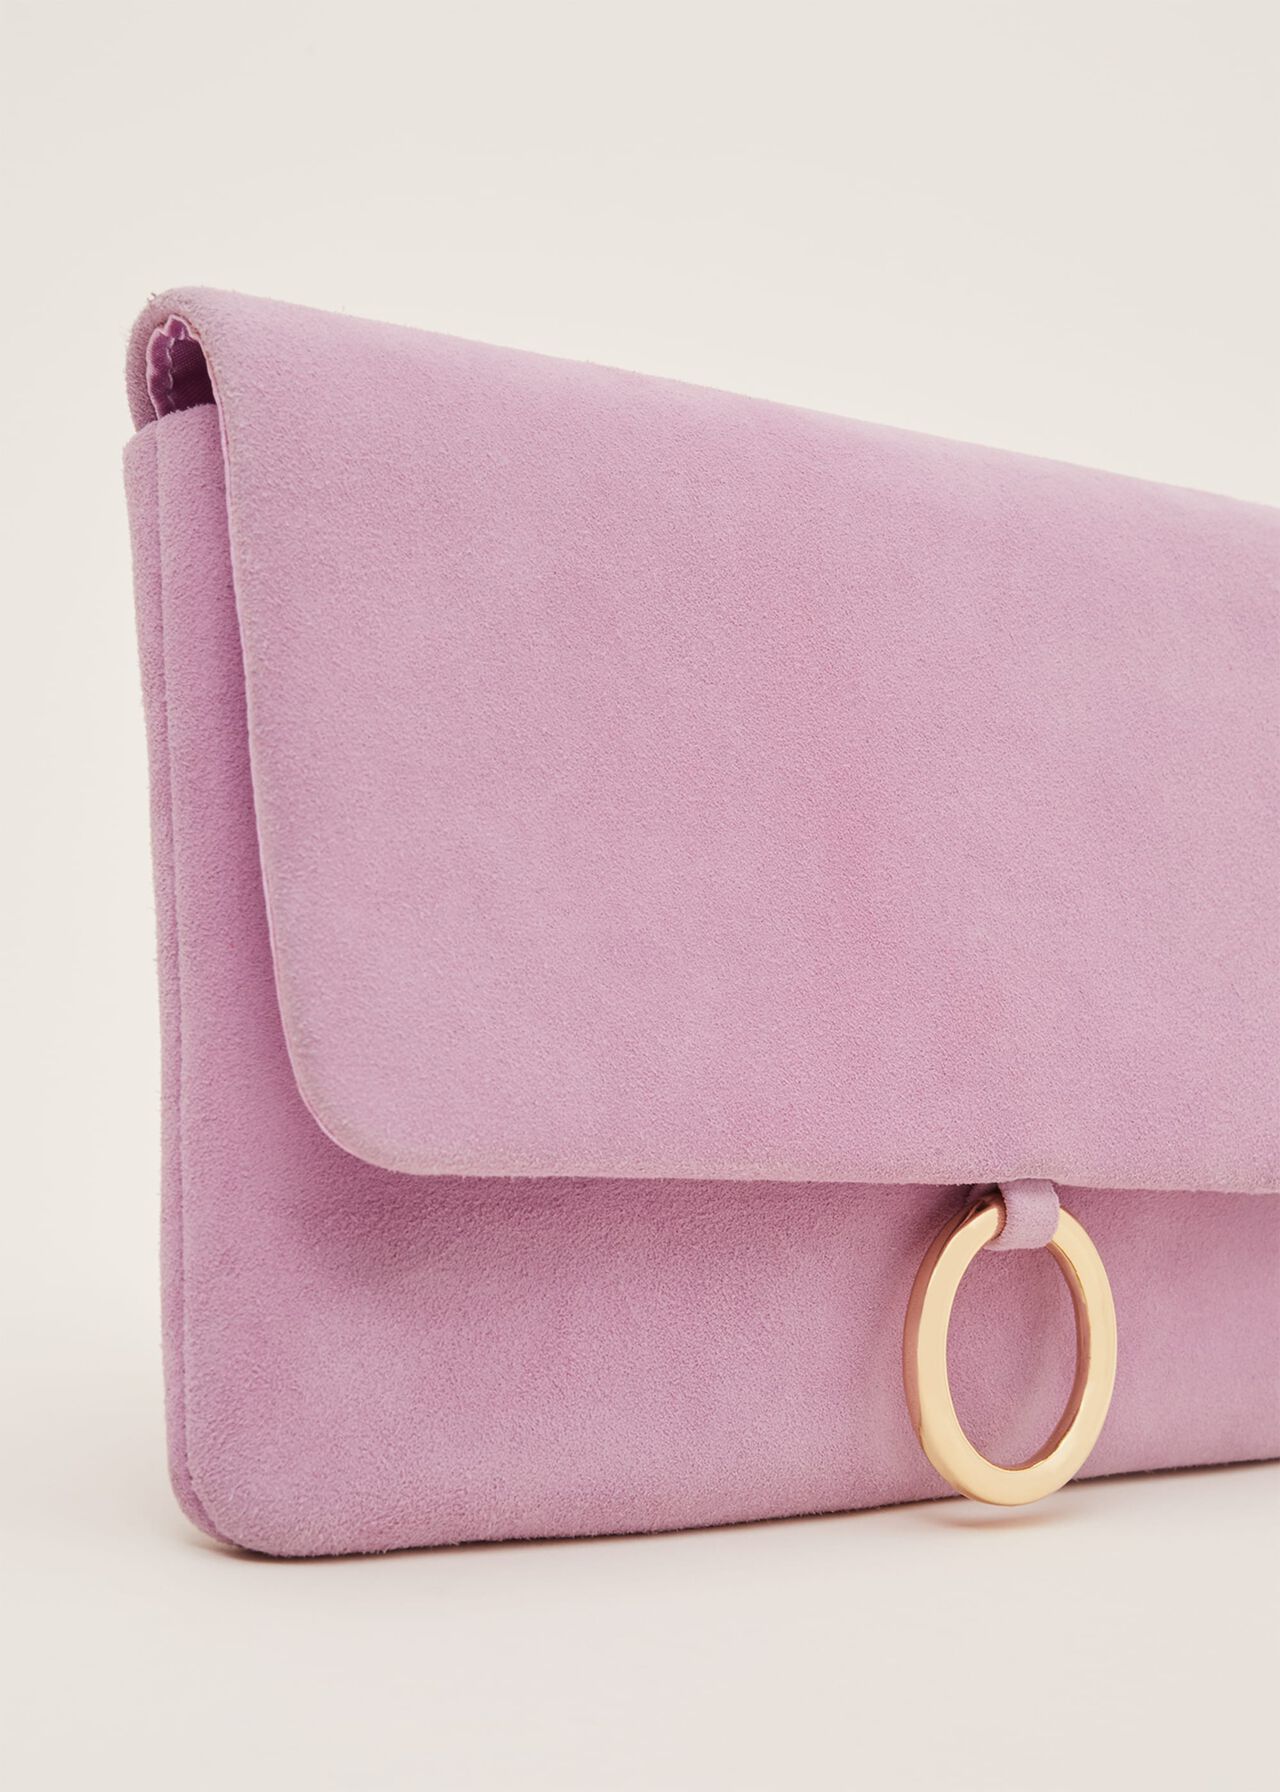 Giselle Suede Clutch Bag